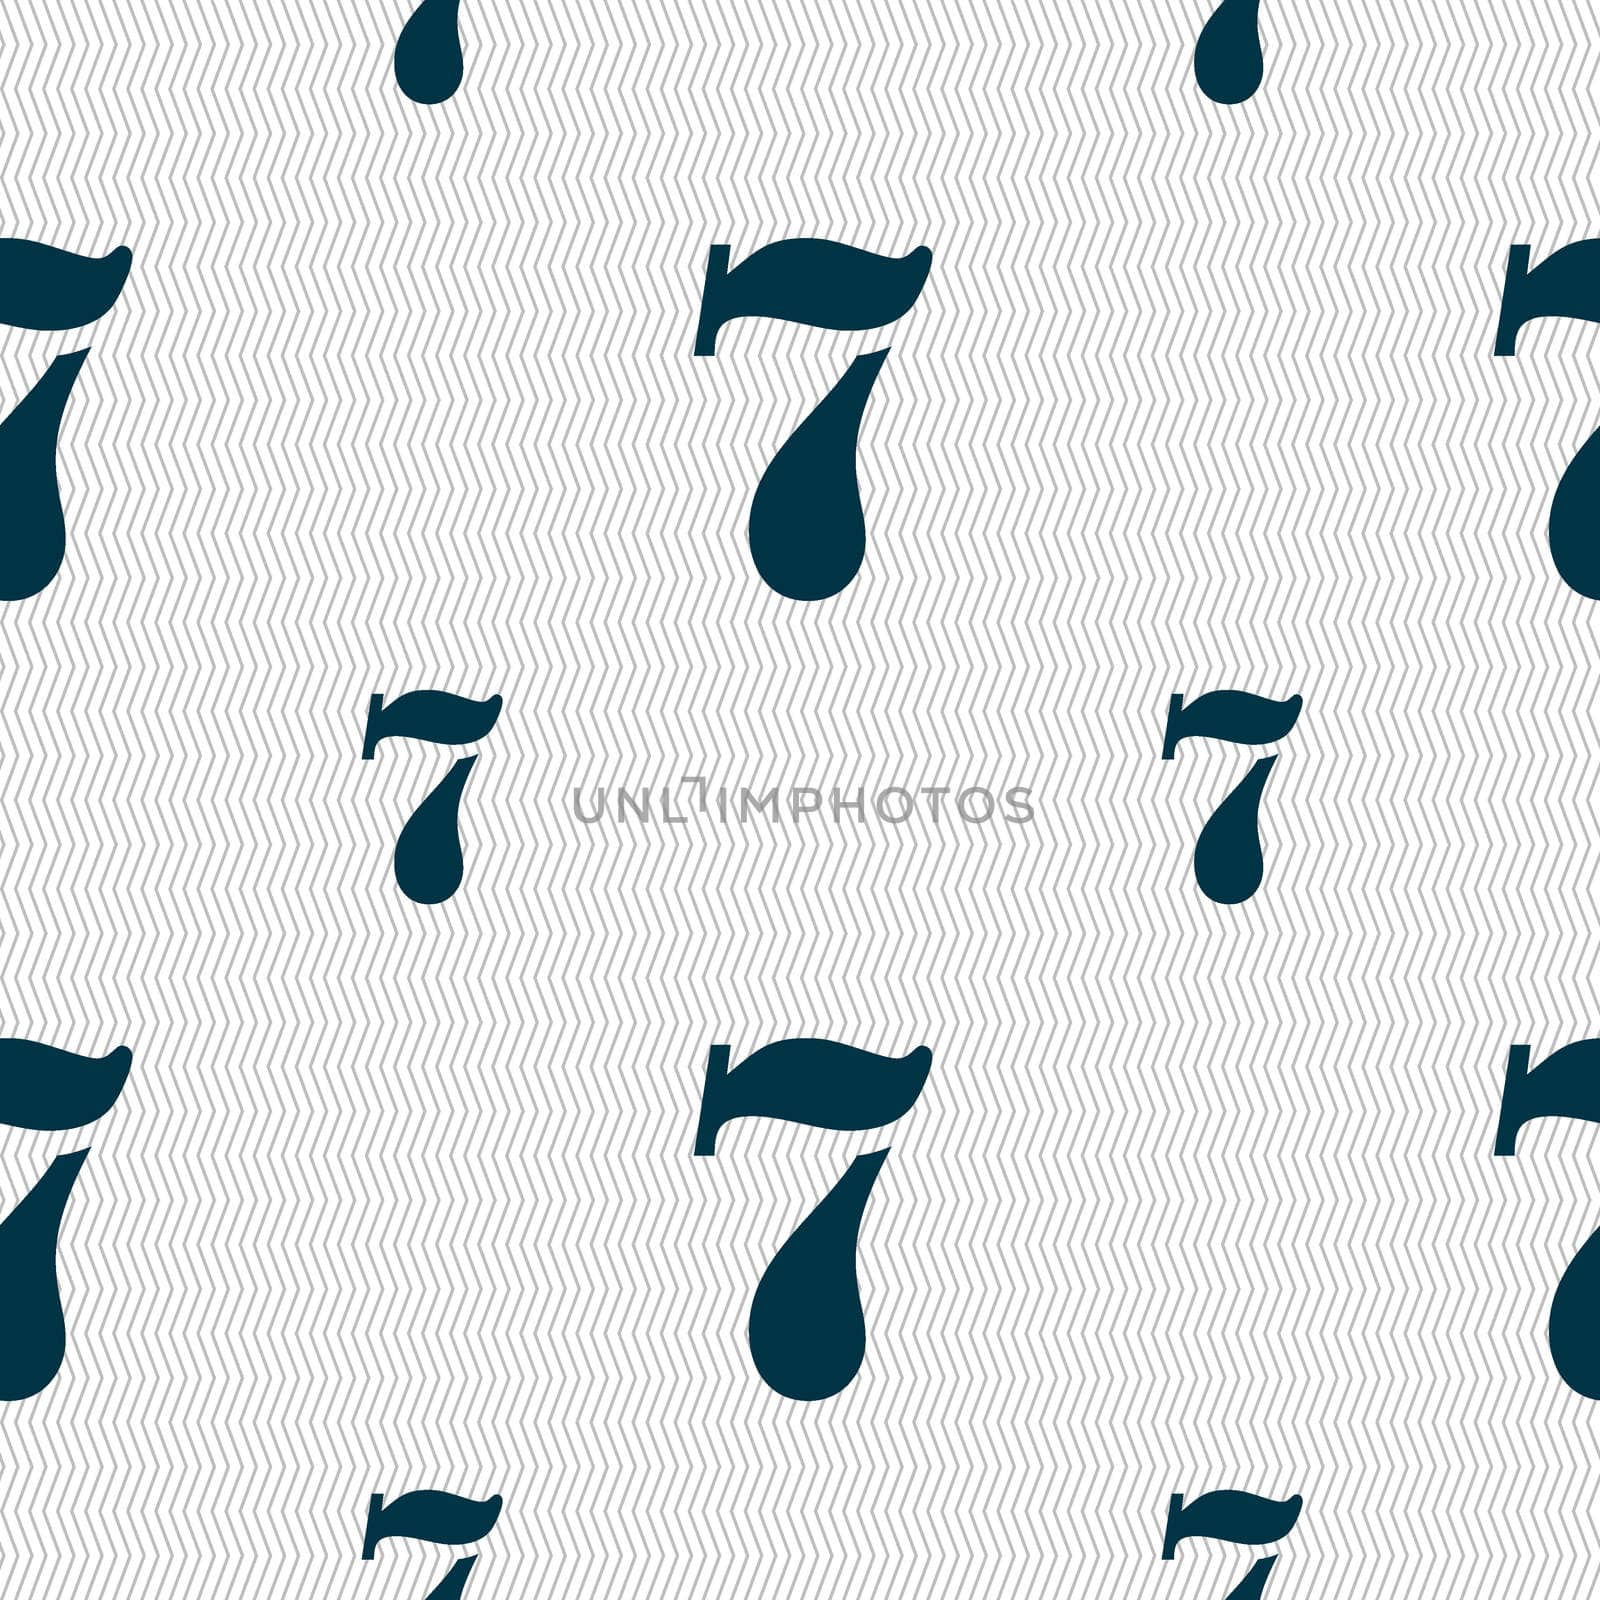 number seven icon sign. Seamless pattern with geometric texture. illustration